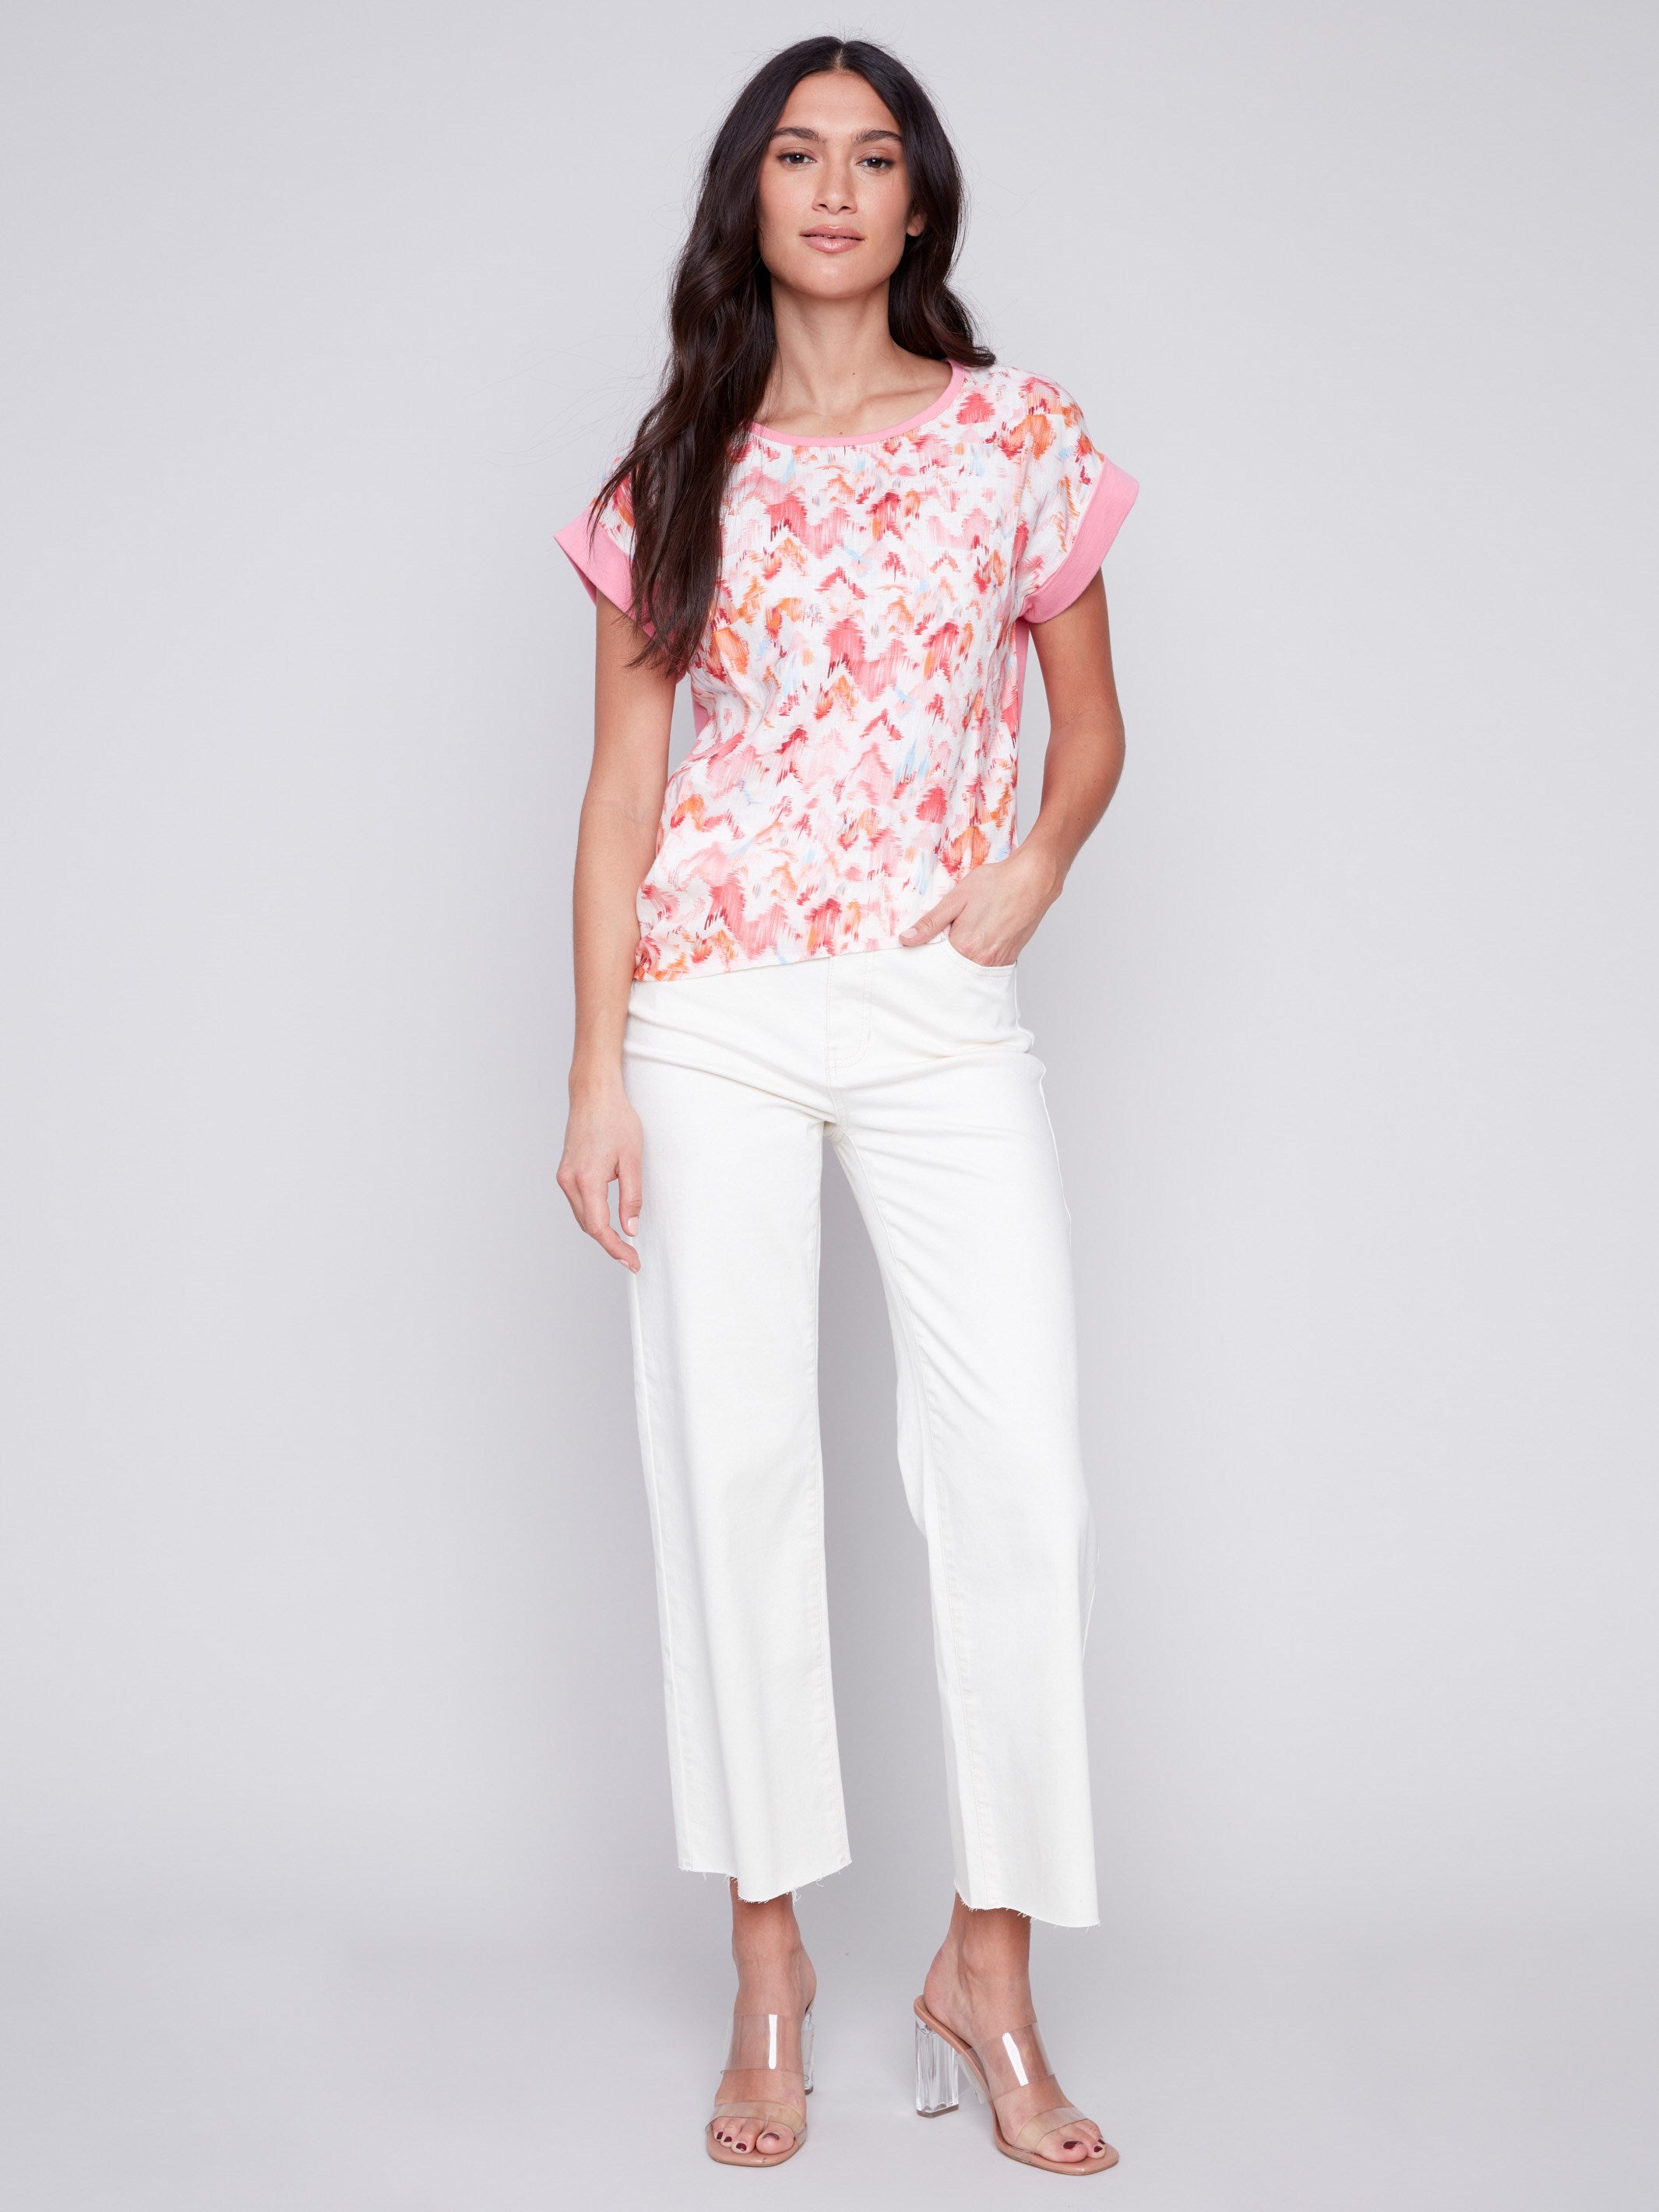 Printed Linen Top with Side Tie - Pink - Charlie B Collection Canada - Image 3